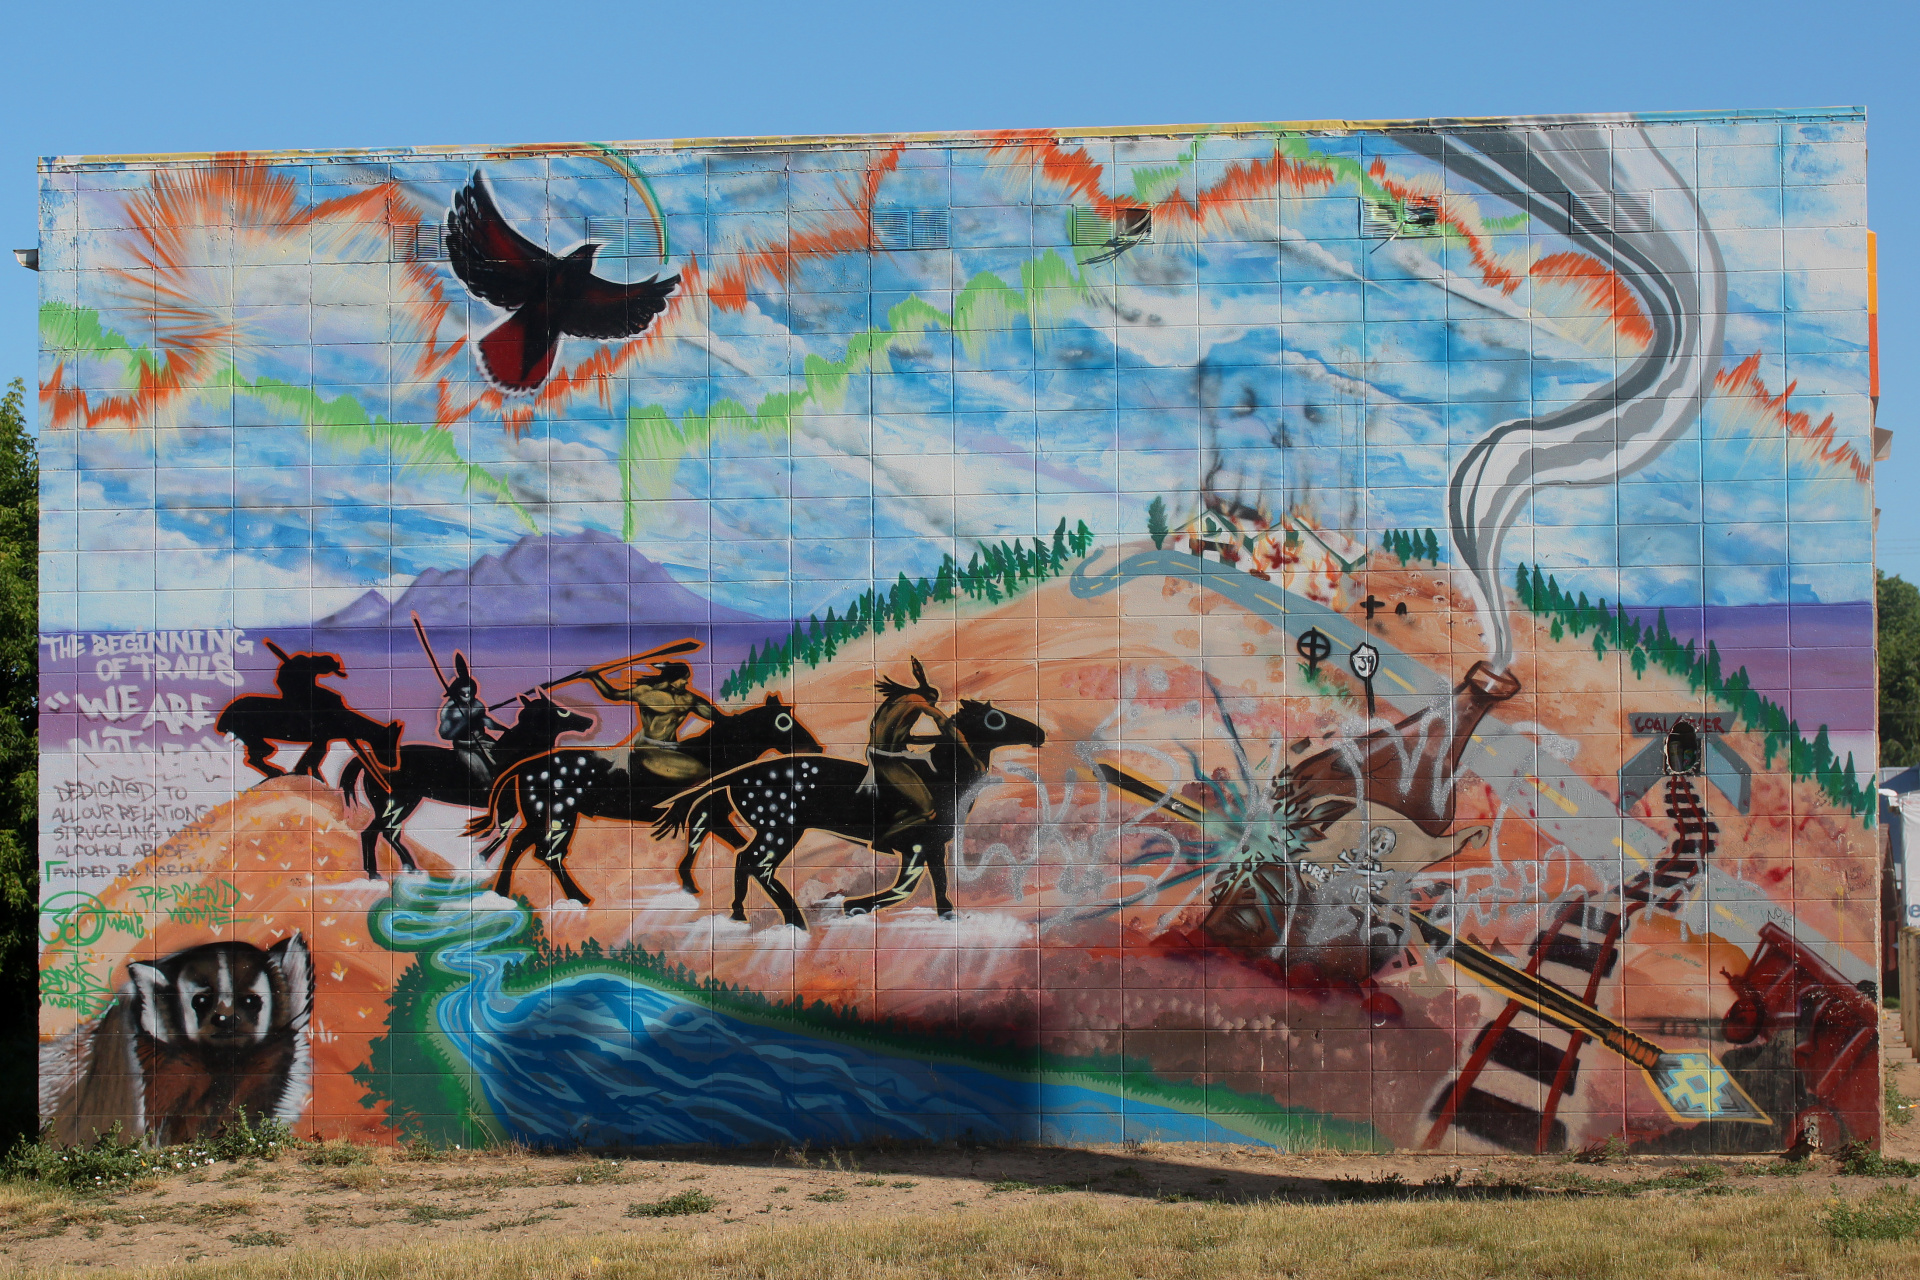 "The Beginning of Trails" Graffiti (Travels » US Trip 3: The Roads Not Taken » The Rez » Lame Deer)